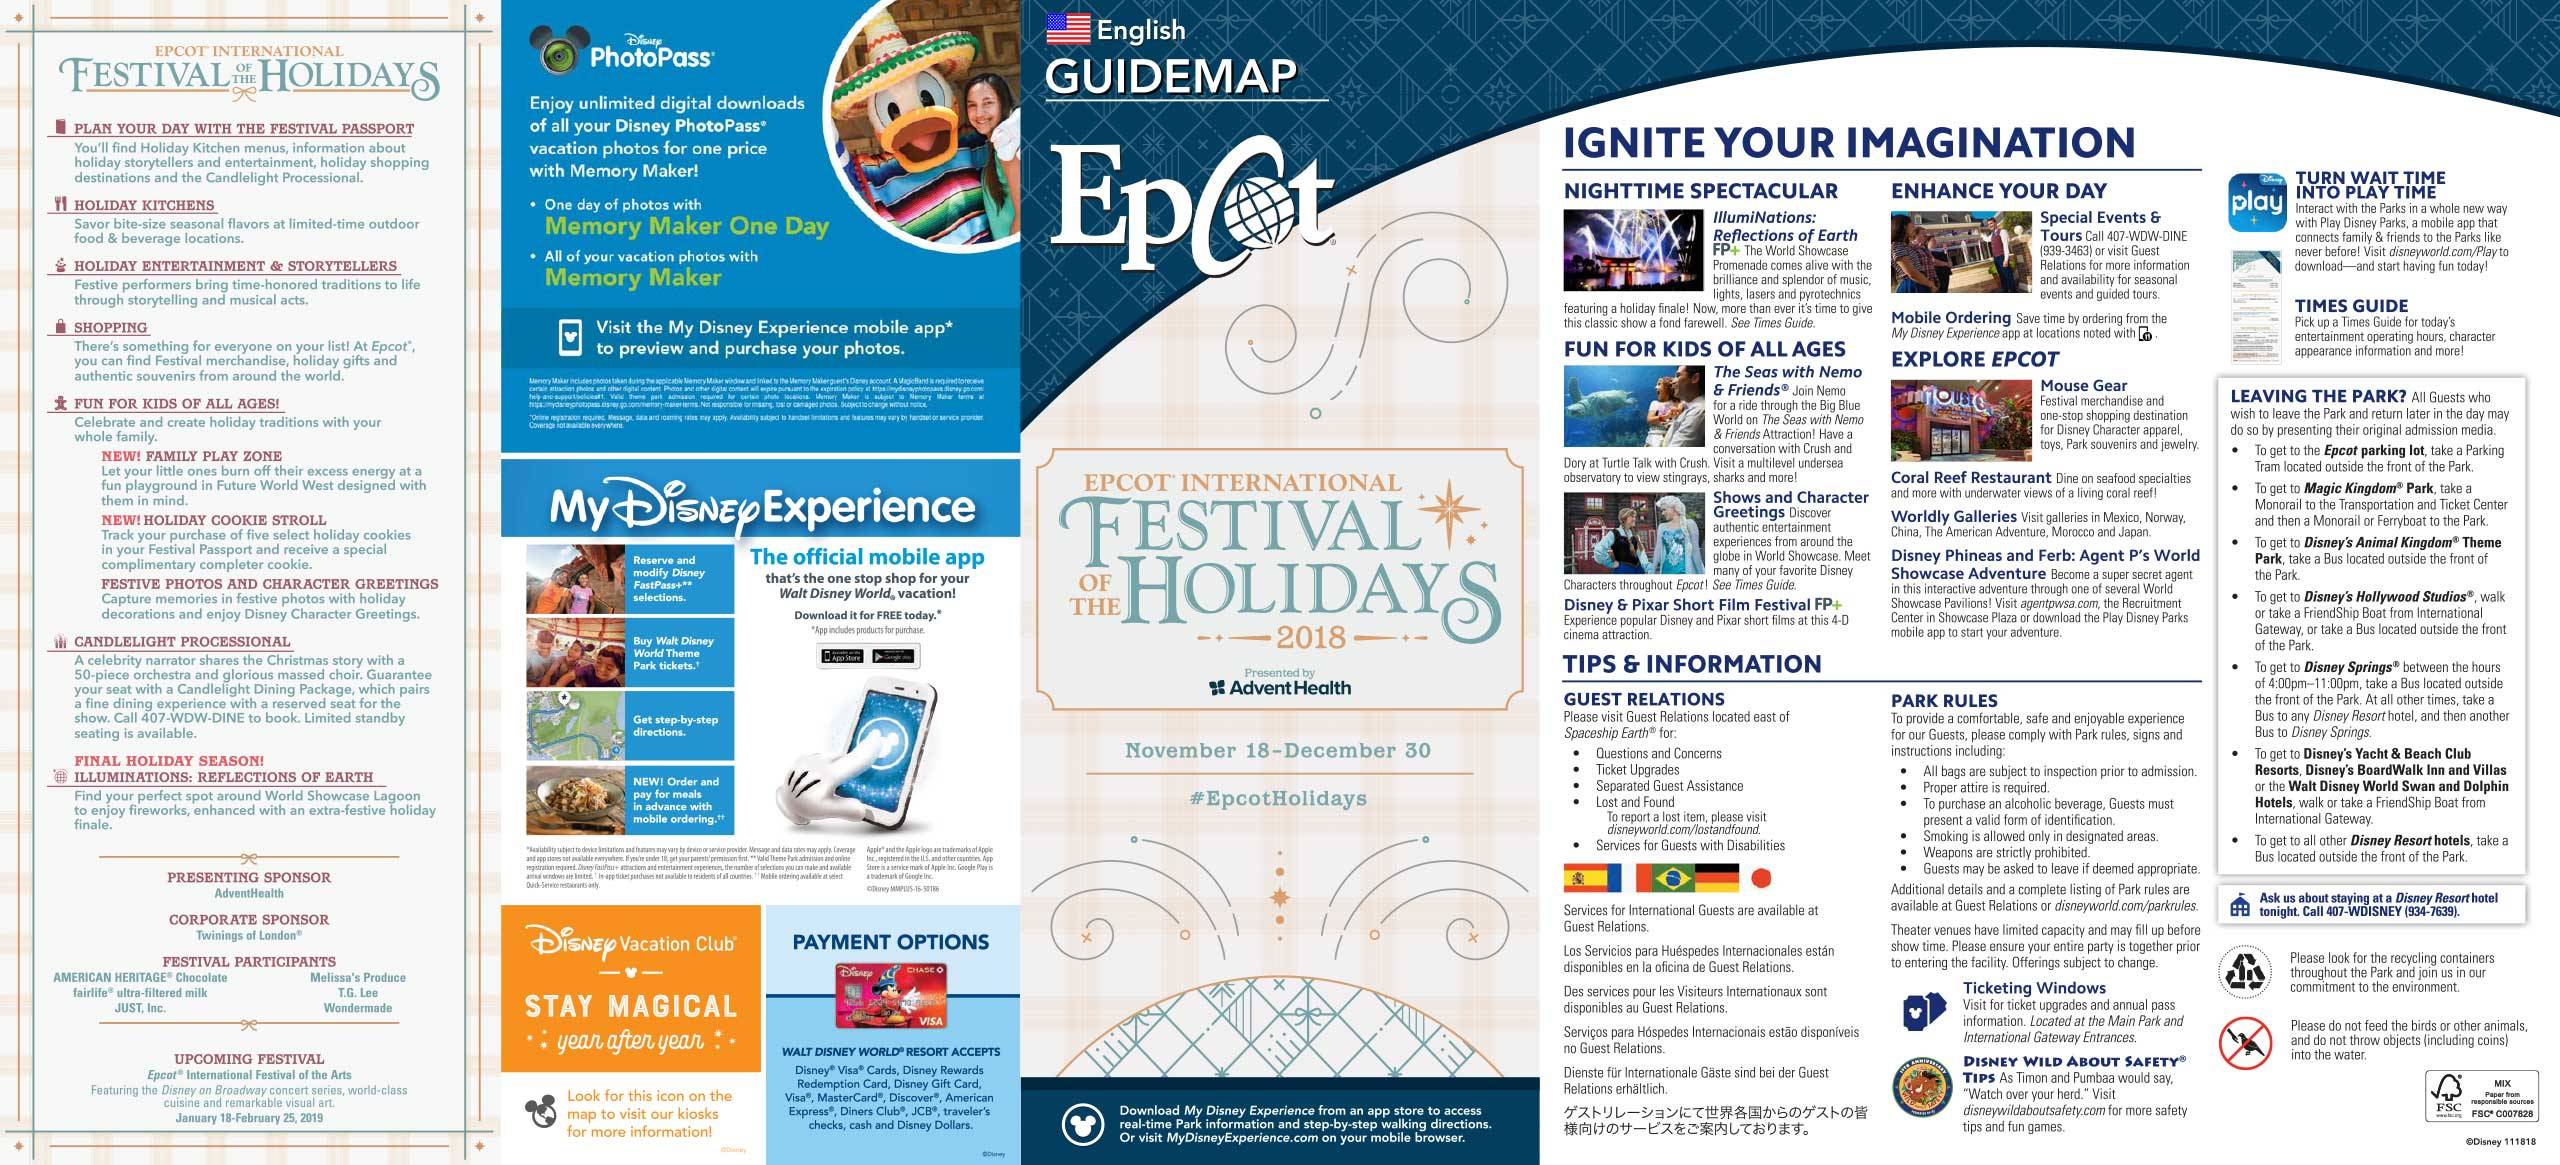 PHOTOS - Epcot 2018 Festival of the Holidays times guide and guide map